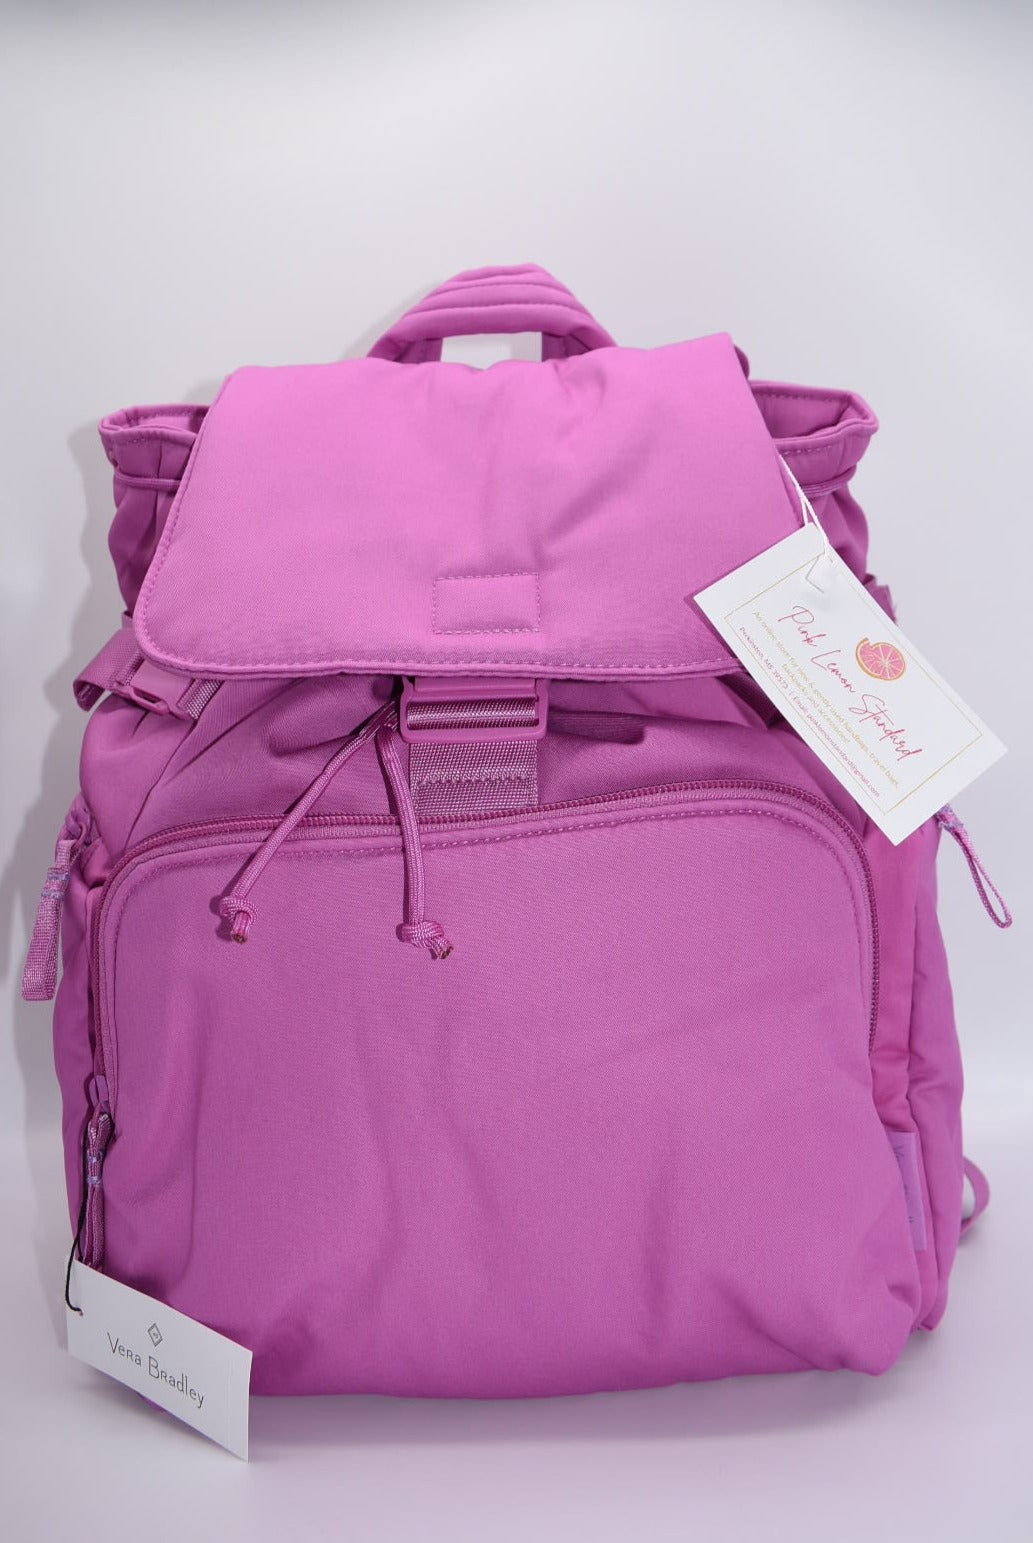 Vera Bradley Utility Backpack in "Rich Orchid" Pattern